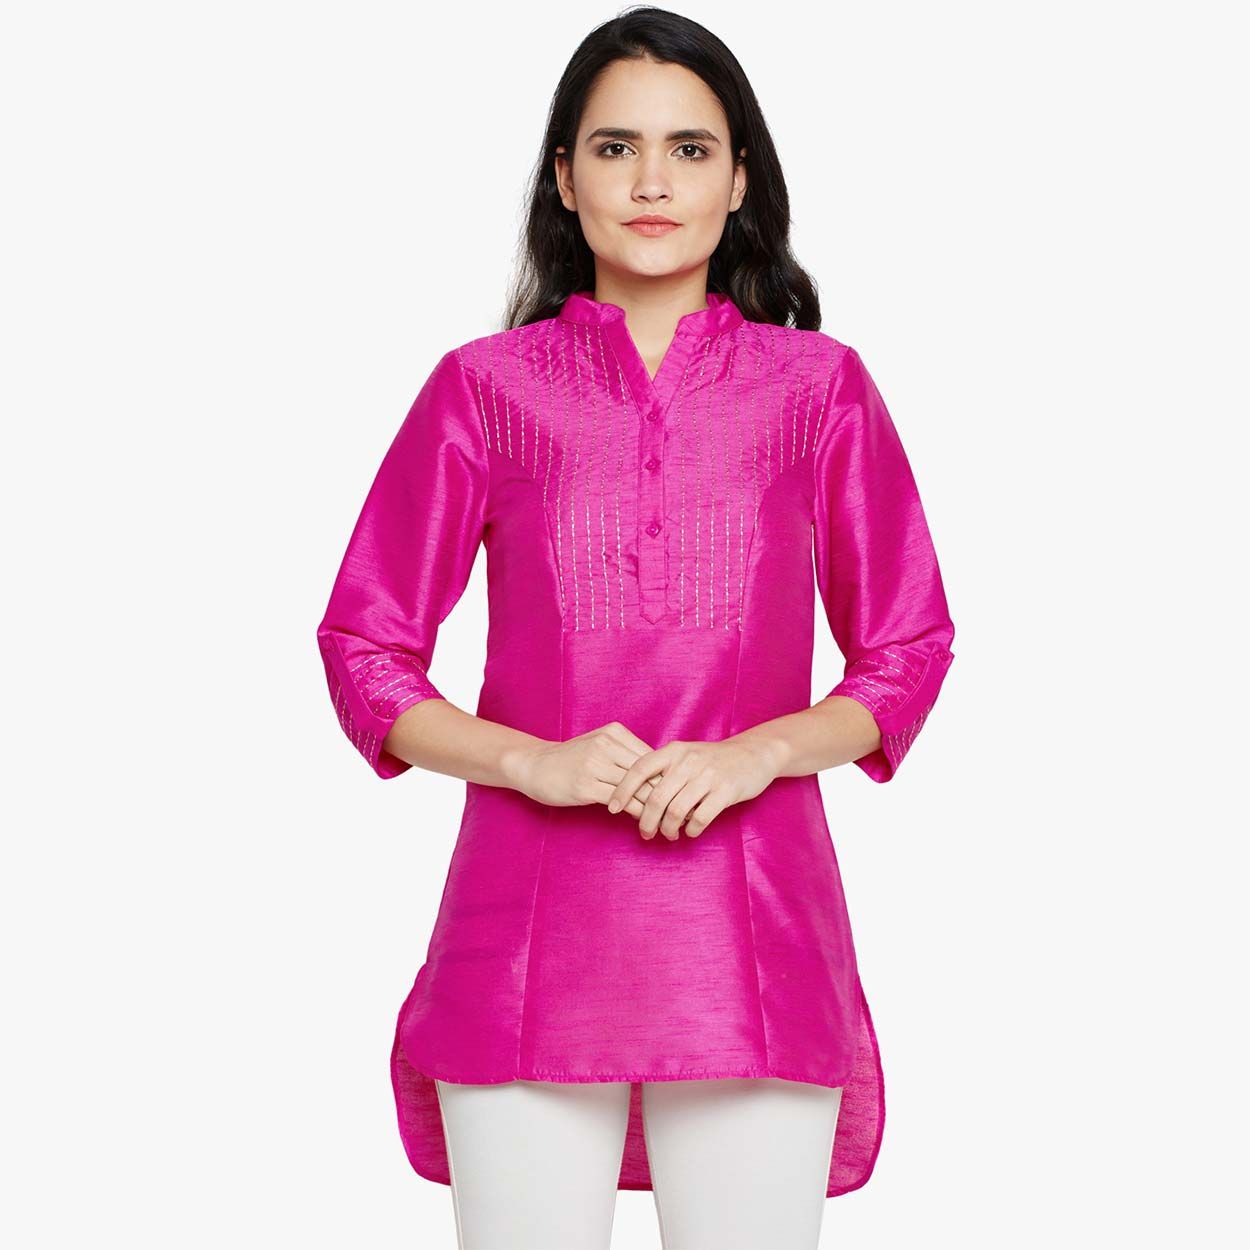 where to buy womens tunics in pink